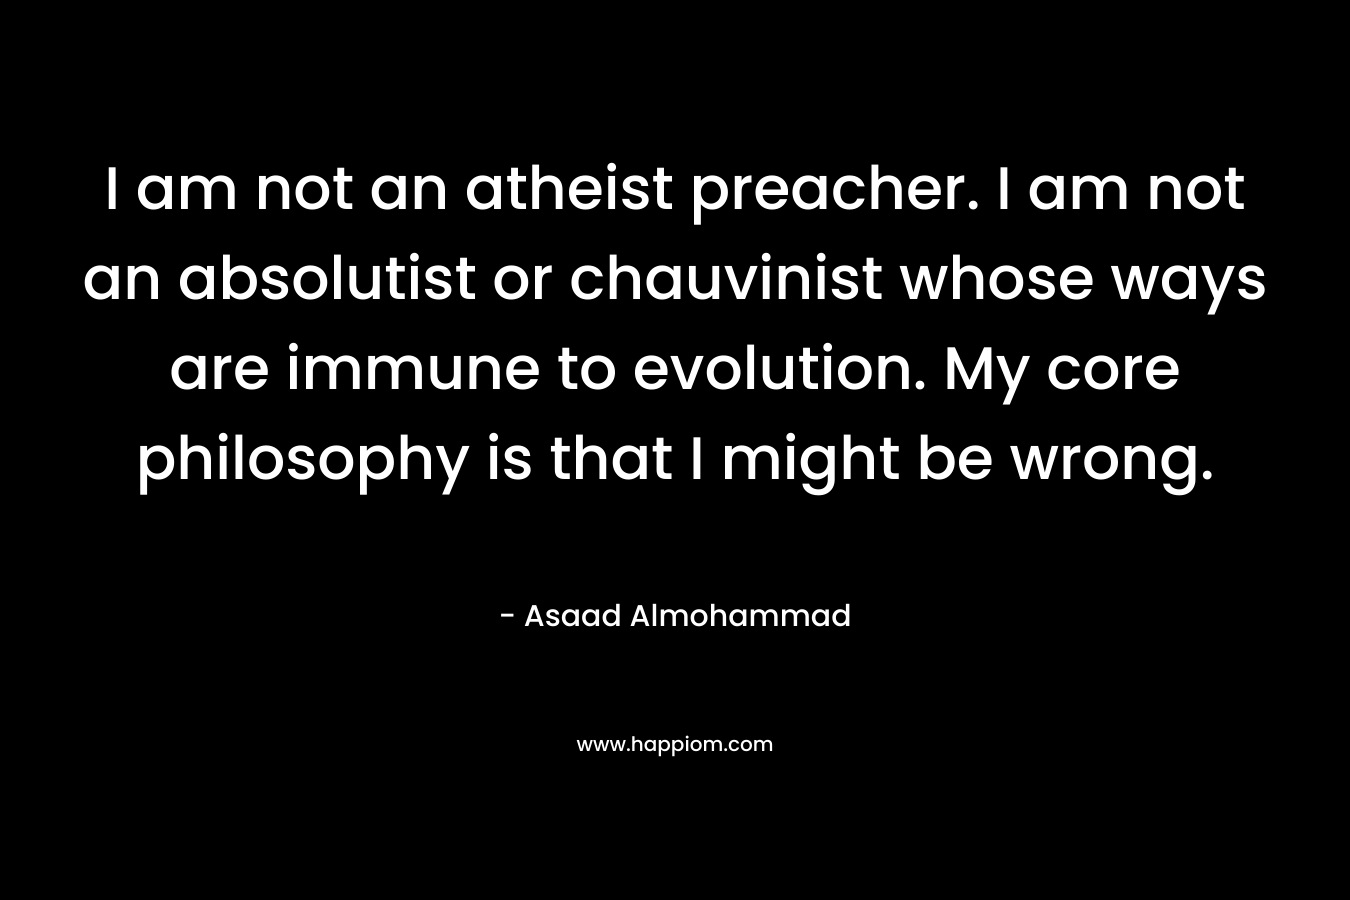 I am not an atheist preacher. I am not an absolutist or chauvinist whose ways are immune to evolution. My core philosophy is that I might be wrong. – Asaad Almohammad